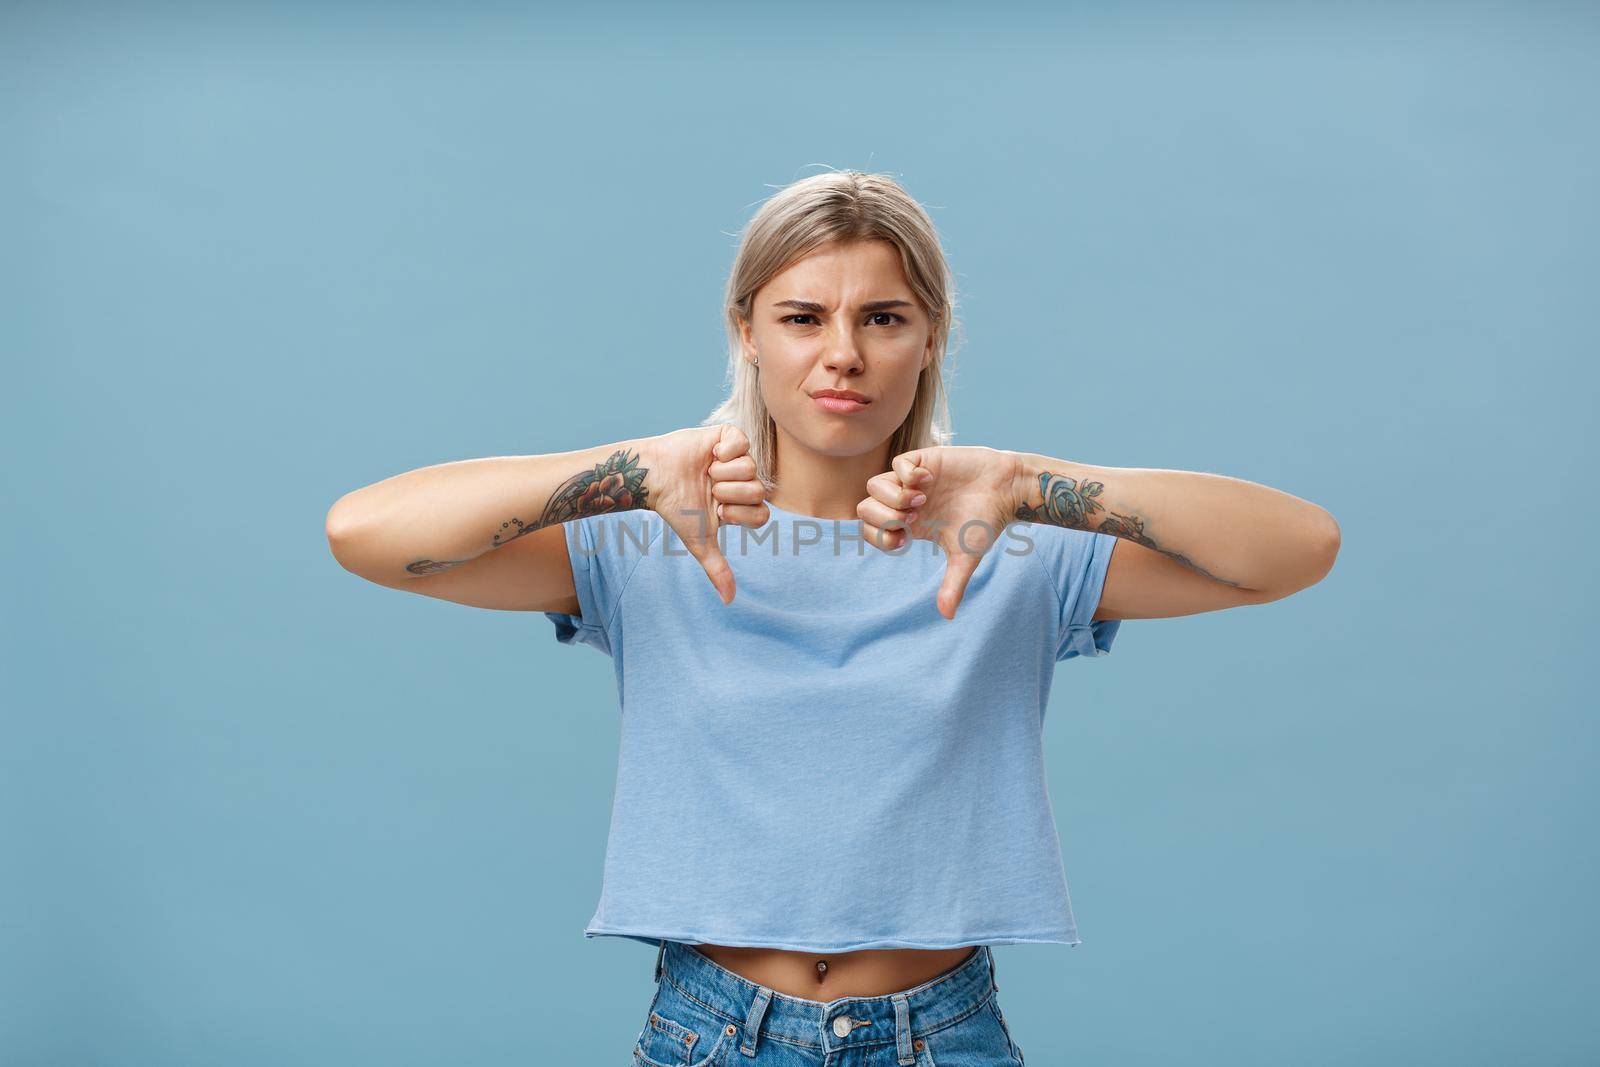 No way mate dislike. Portrait of dissatisfied bossy female tattoo artist with tattoos on arms frowning from displeasure showing thumbs down in disapproval standing over blue background. Copy space